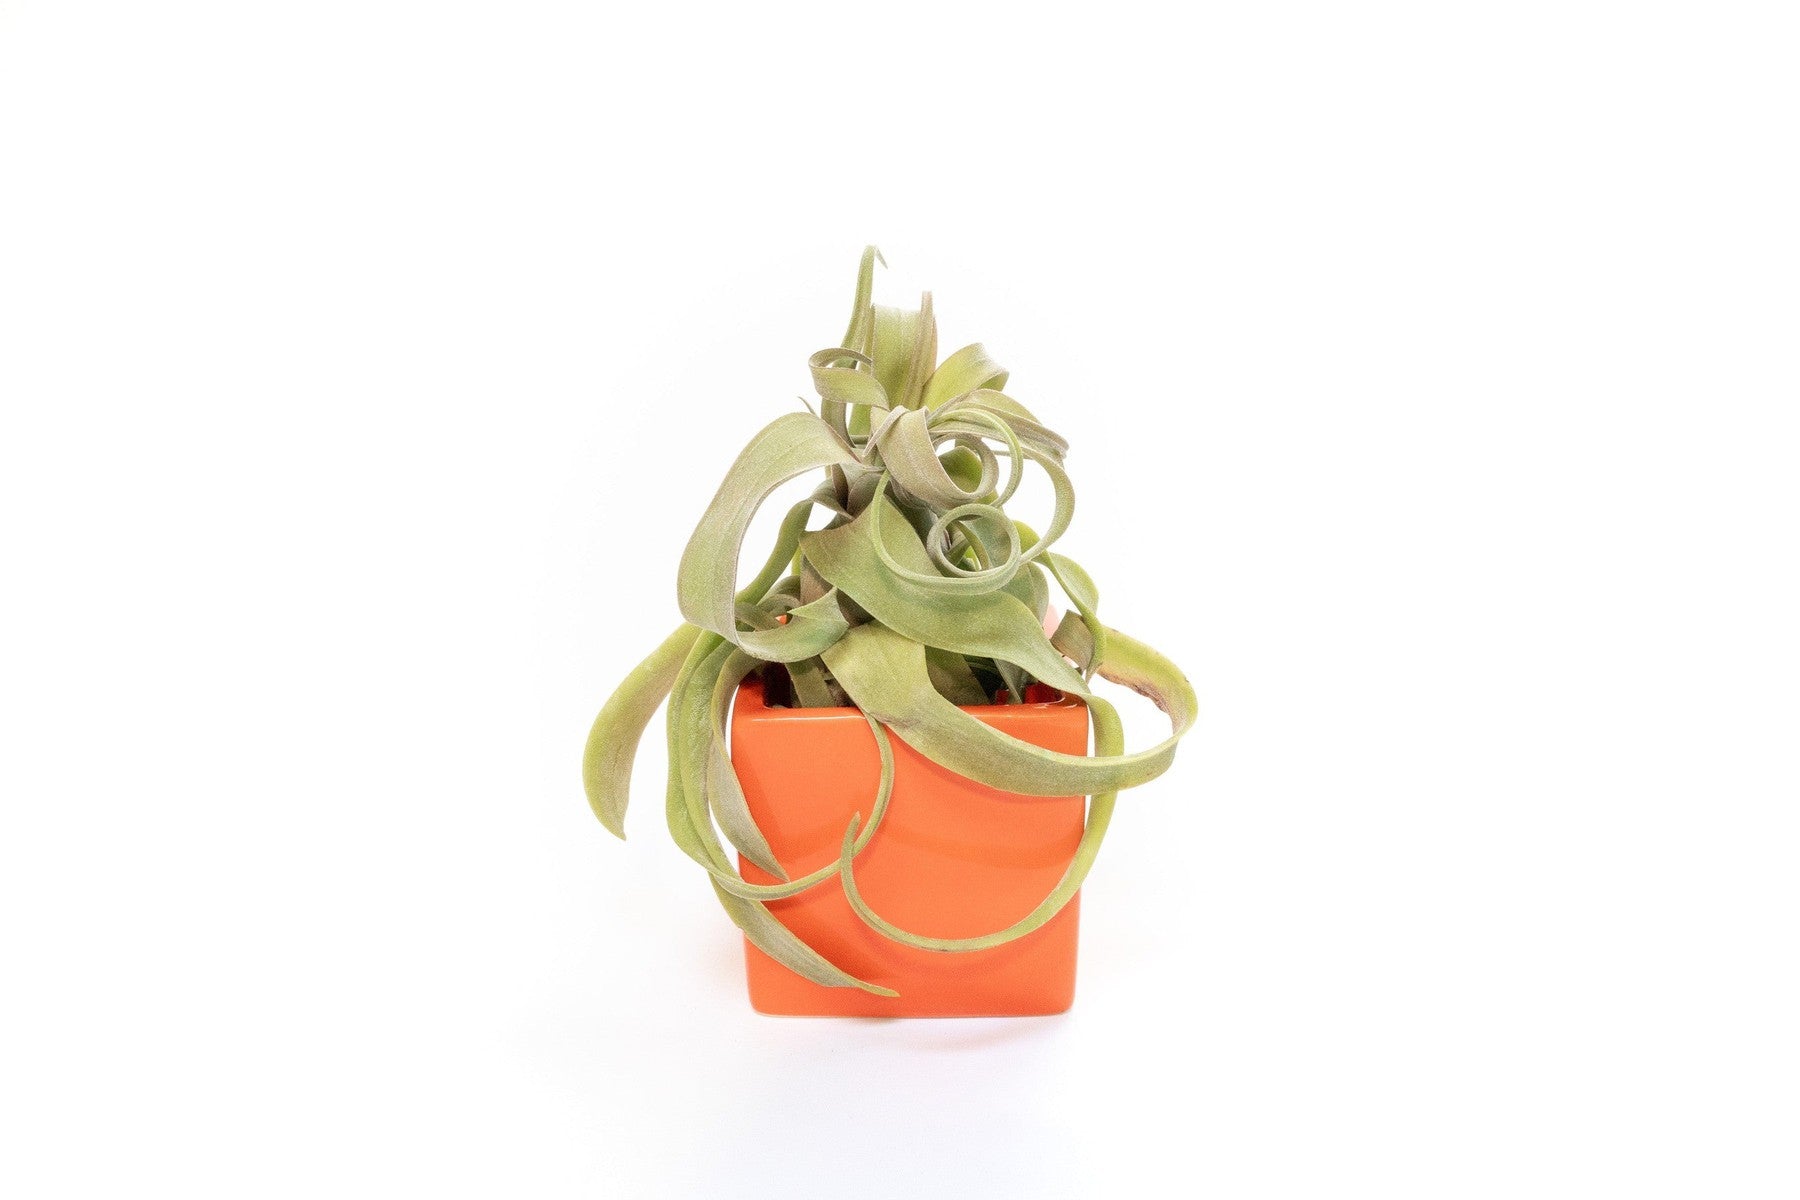 Ceramic Cube Container - Choose Your Custom Color and Tillandsia Air Plant-The Succulent Source